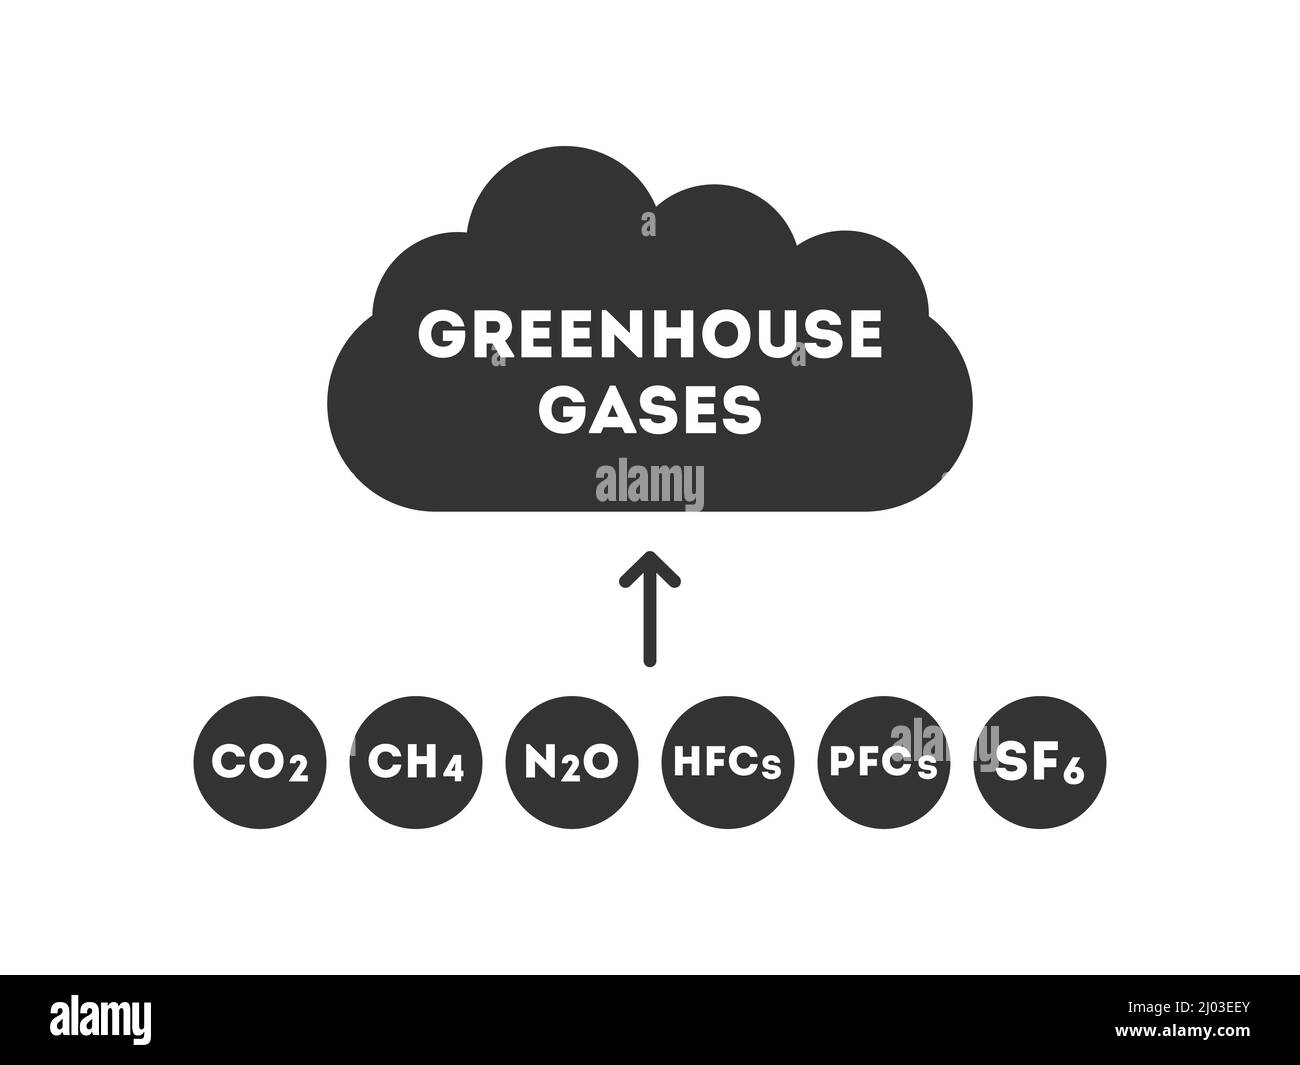 Greenhouse gases. Carbon dioxide, Methane, Nitrous oxide, Hydrofluorocarbons, Perfluorocarbons, Sulfur hexafluoride. Six GHG gases. Vector Stock Vector